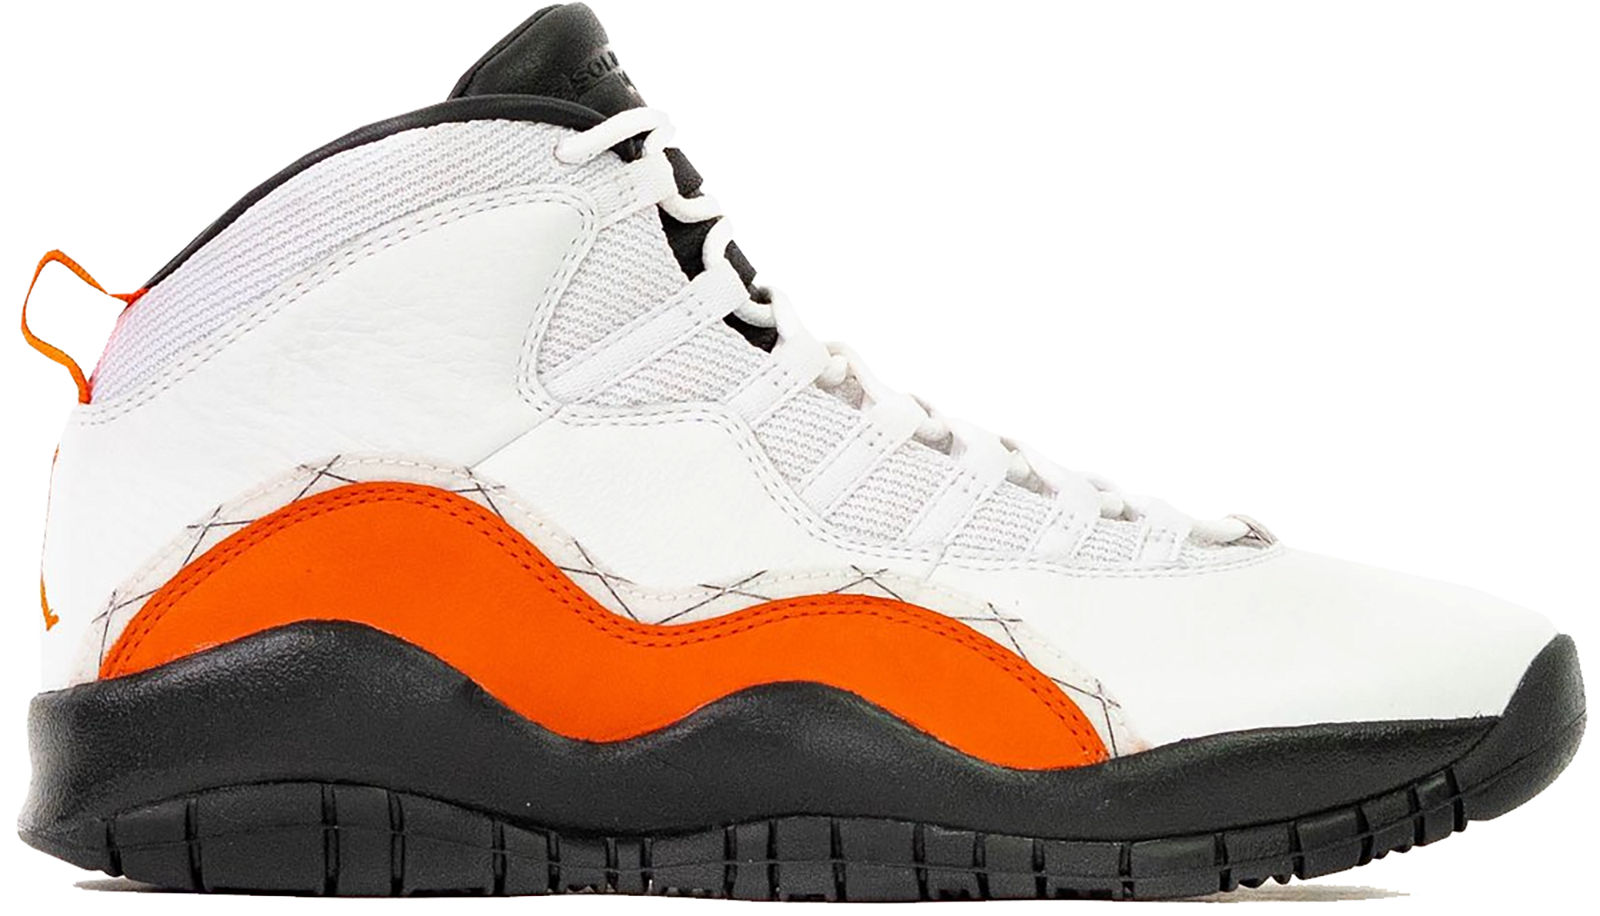 Jordan 10 Retro SoleFly (Friends and Family) sneakers